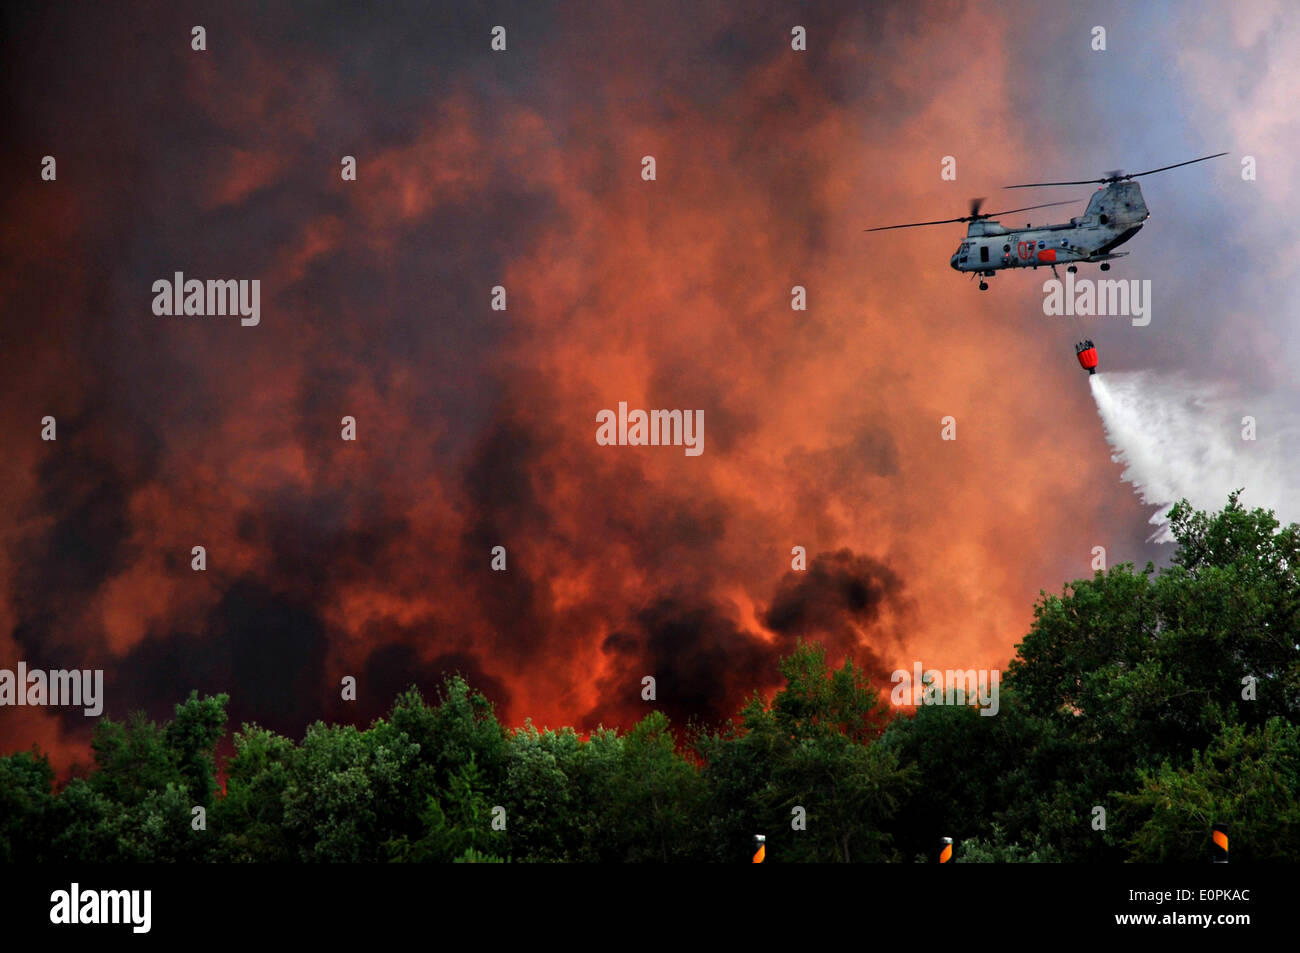 A US Marine Corps helicopter carries water using a Bambi bucket to help fight the Tomahawk and Las Pulgas wildfires as they burn the foothills May 17, 2014 around Camp Pendleton, California.  Evacuations forced more than 13,000 people from their homes as the fire burned across San Diego County. Stock Photo